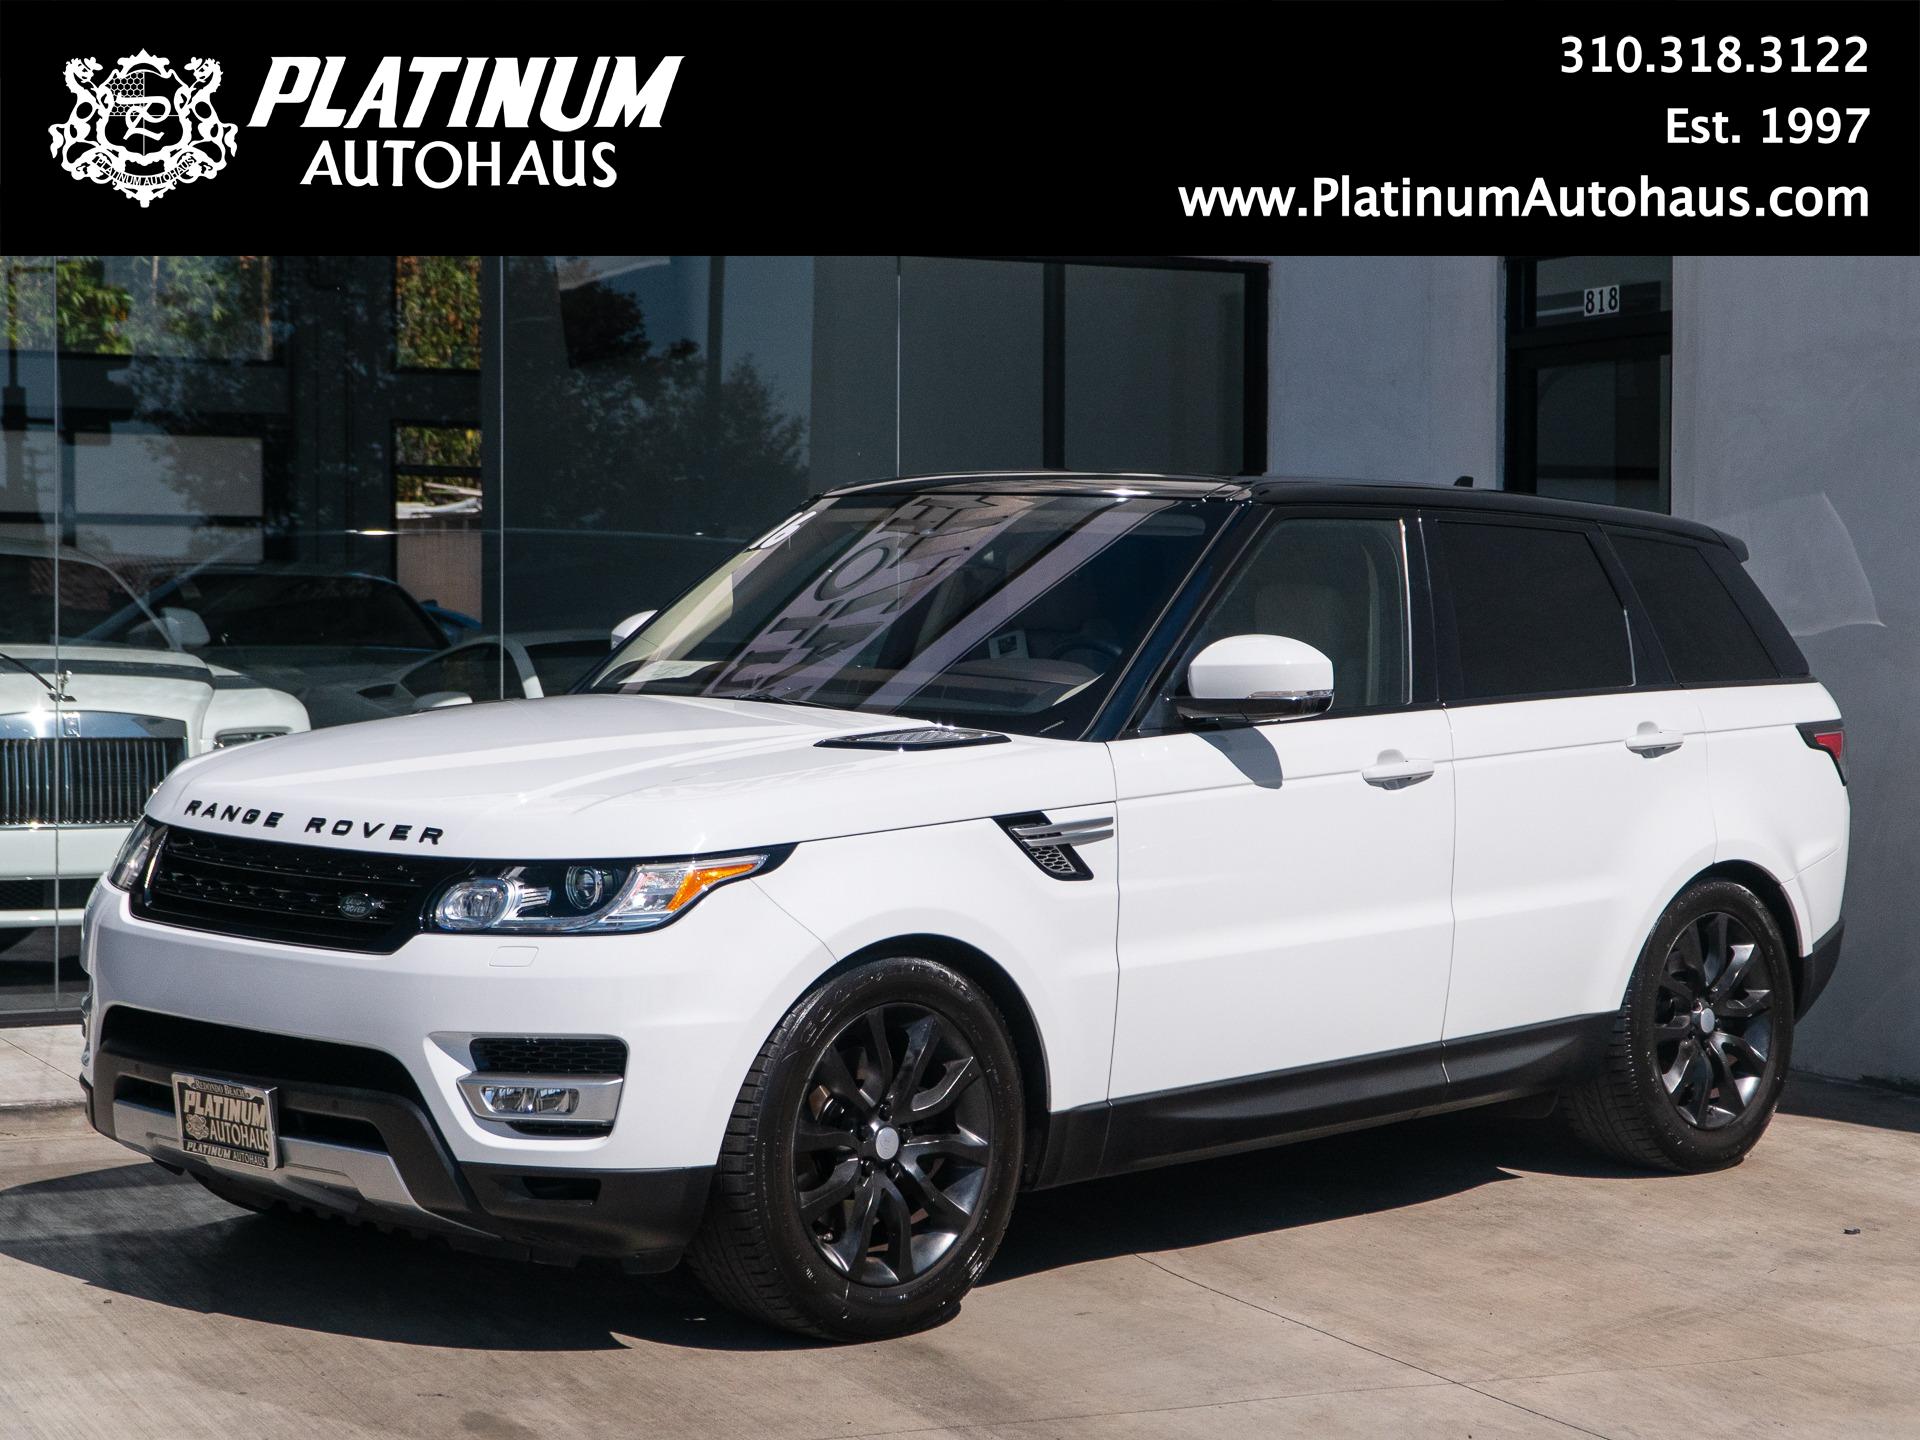 Range Rover Dealer Used  . Search Over 5,718 Used Land Rovers.